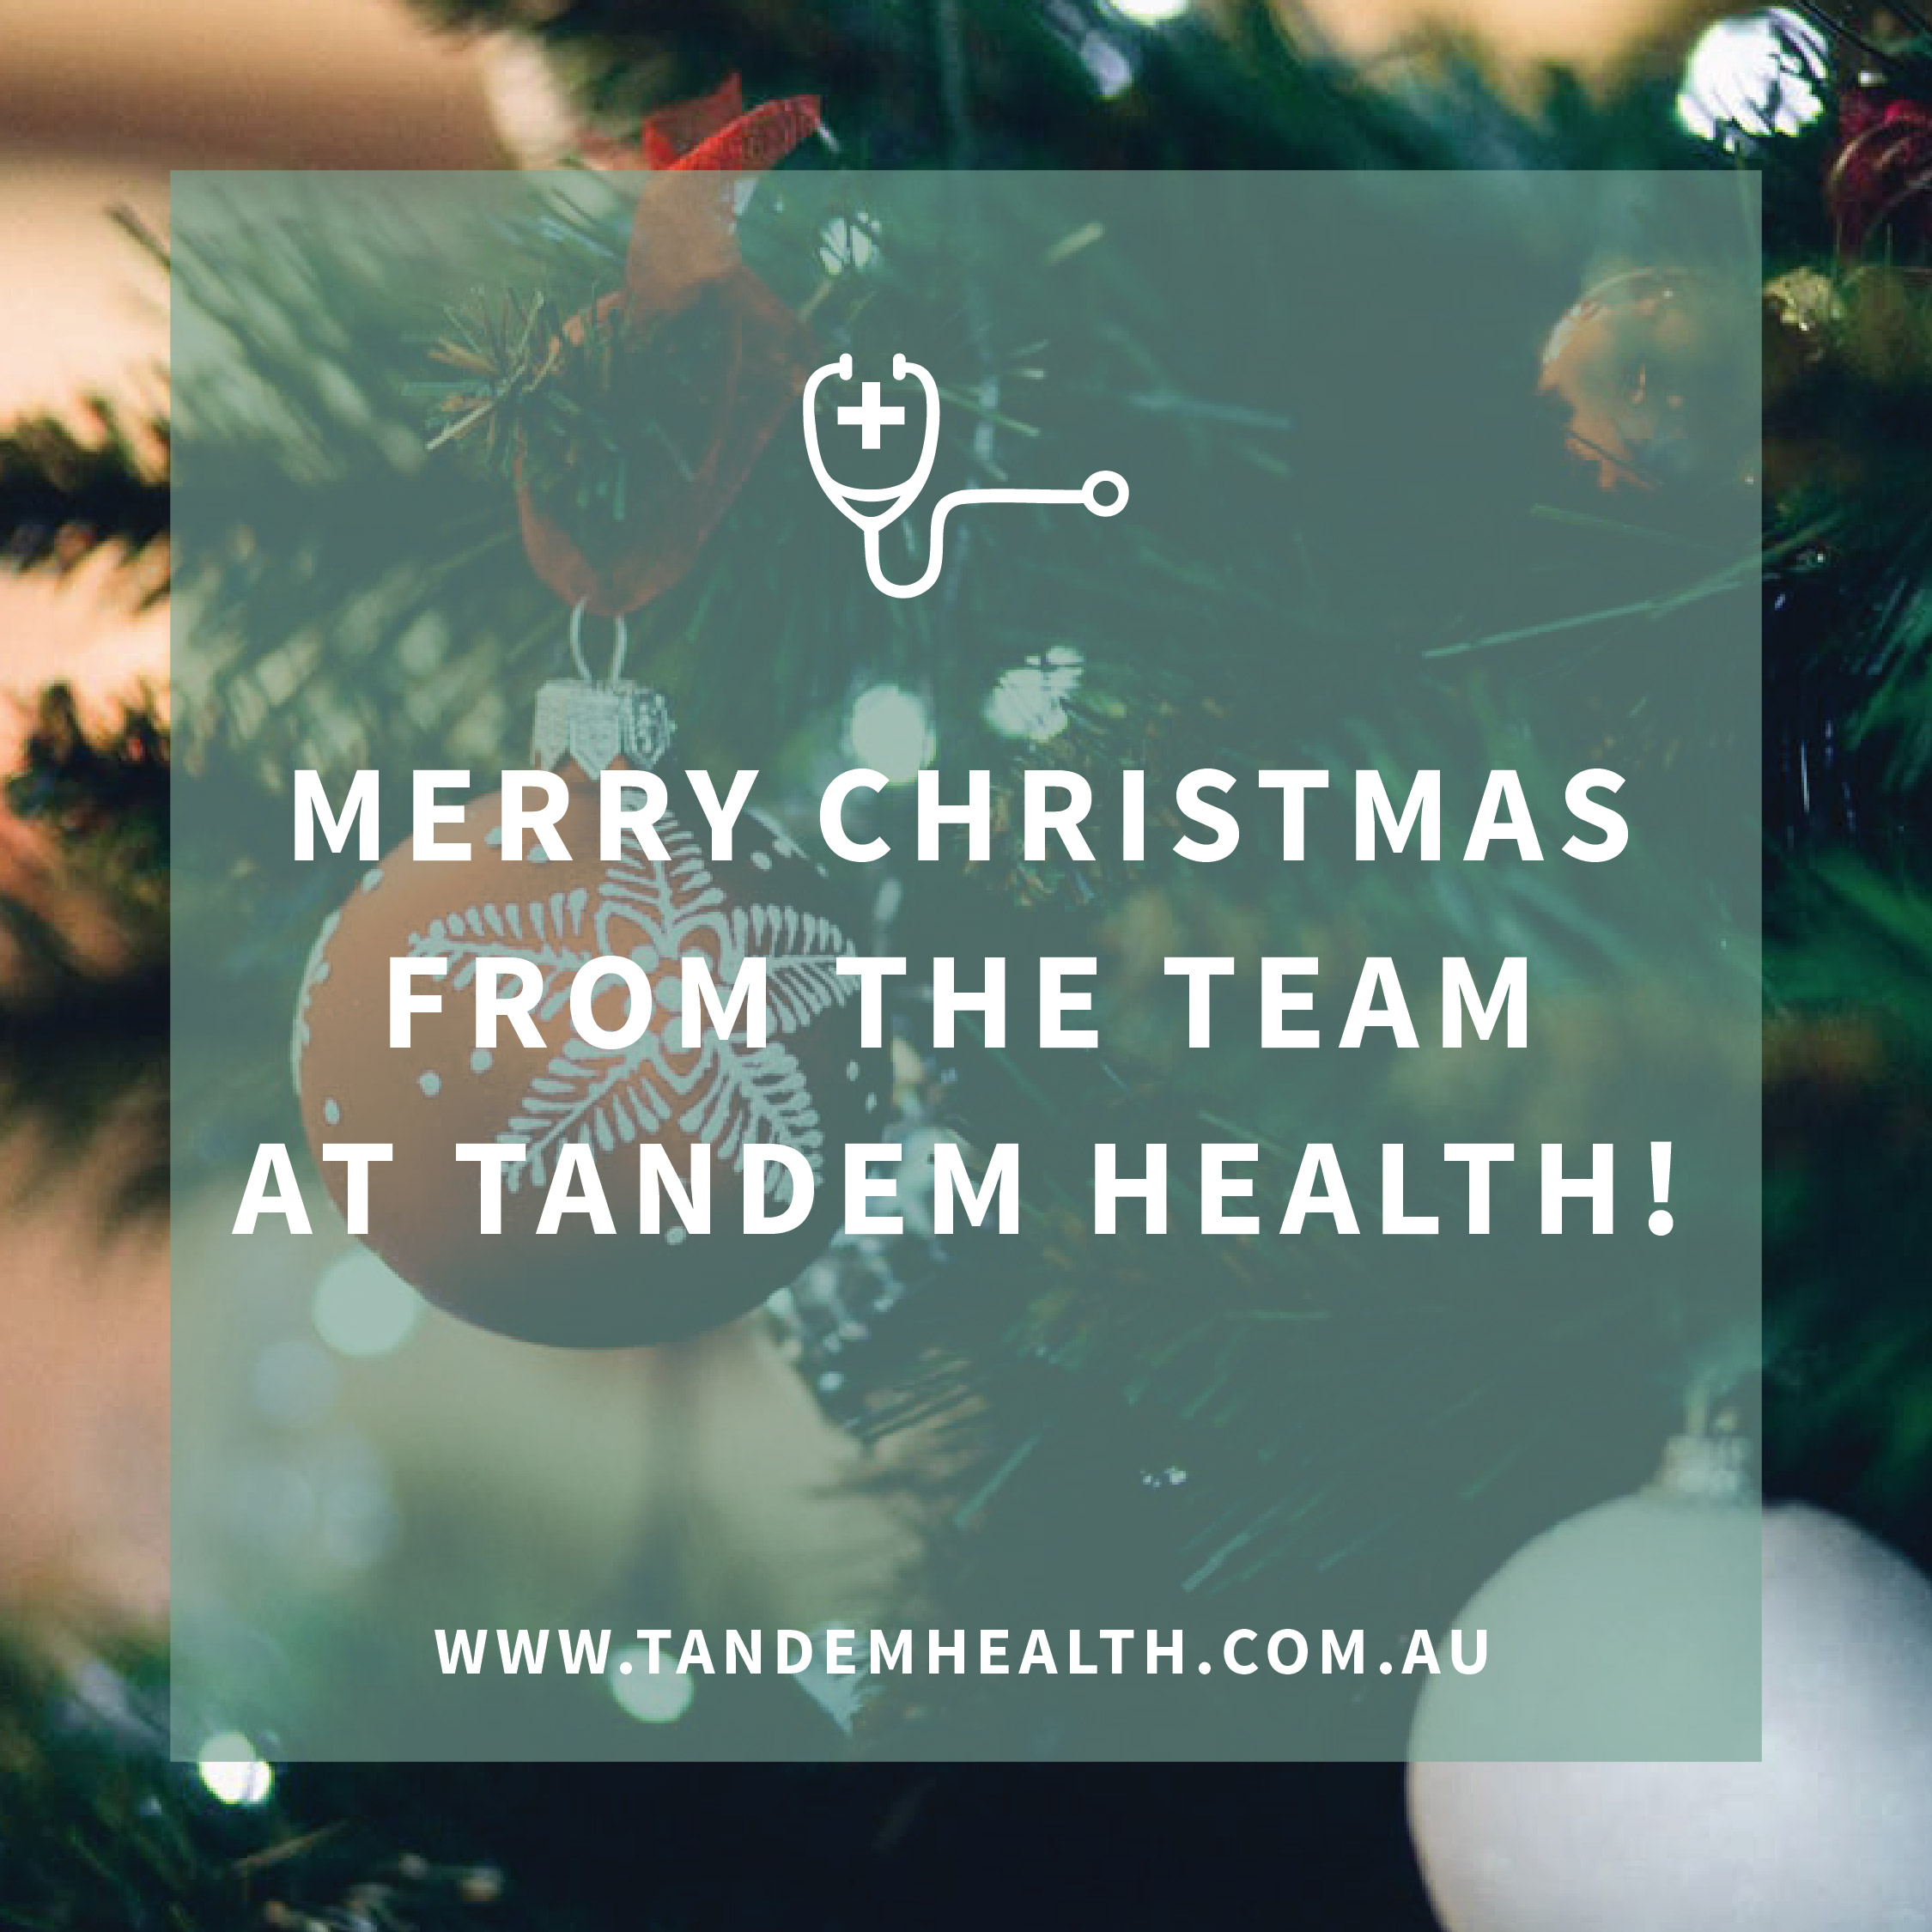 Merry Christmas from Tandem Health